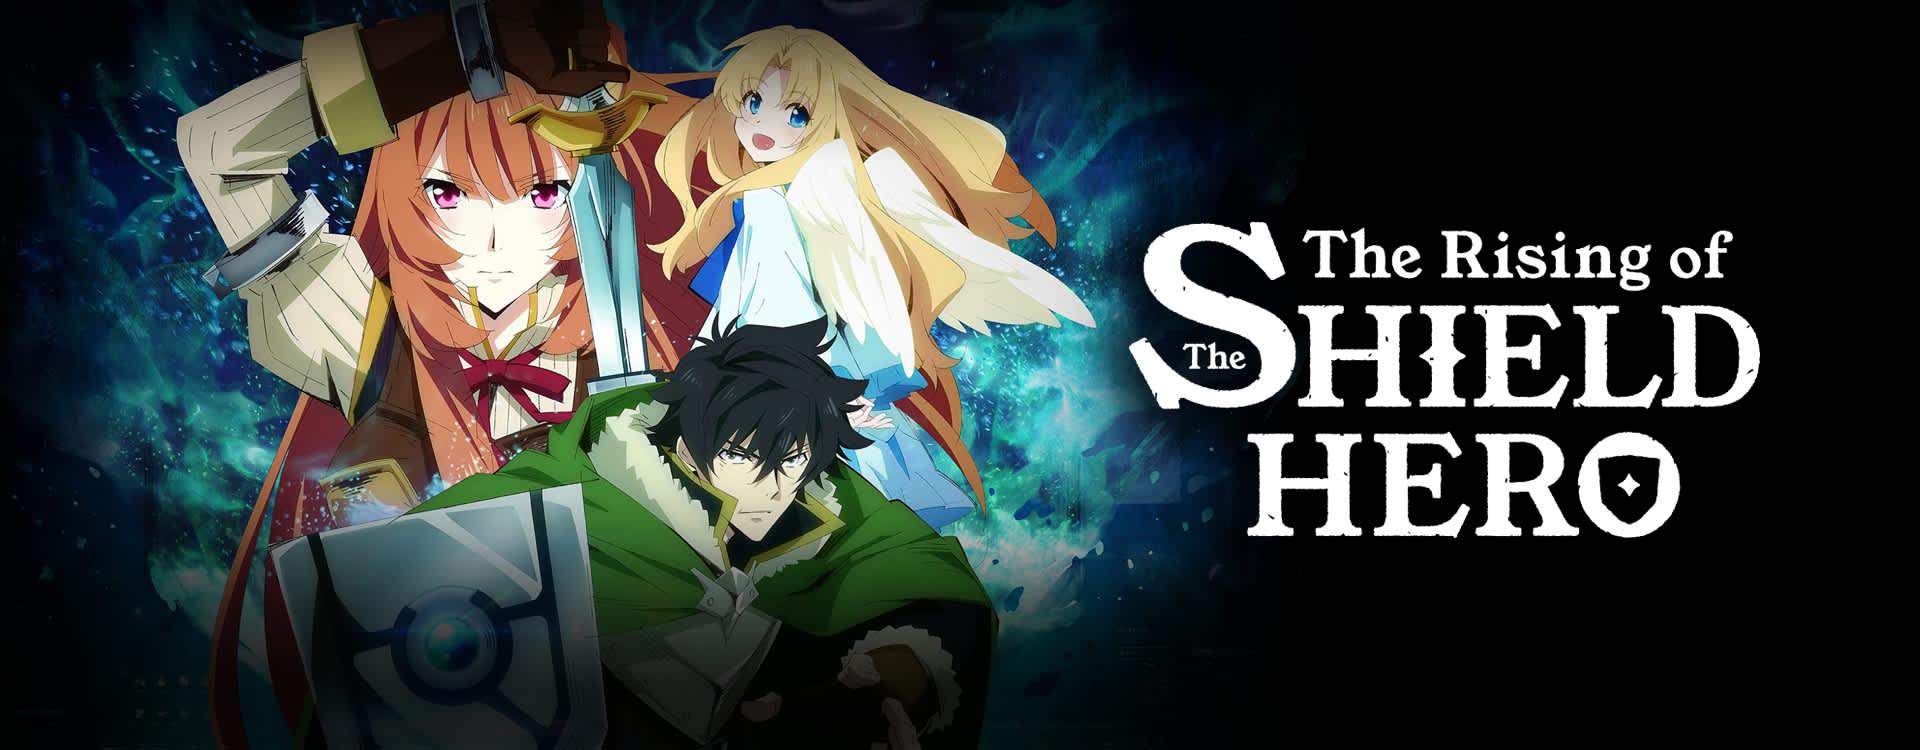 Watch The Rising Of The Shield Hero Episodes Sub & Dub. Action